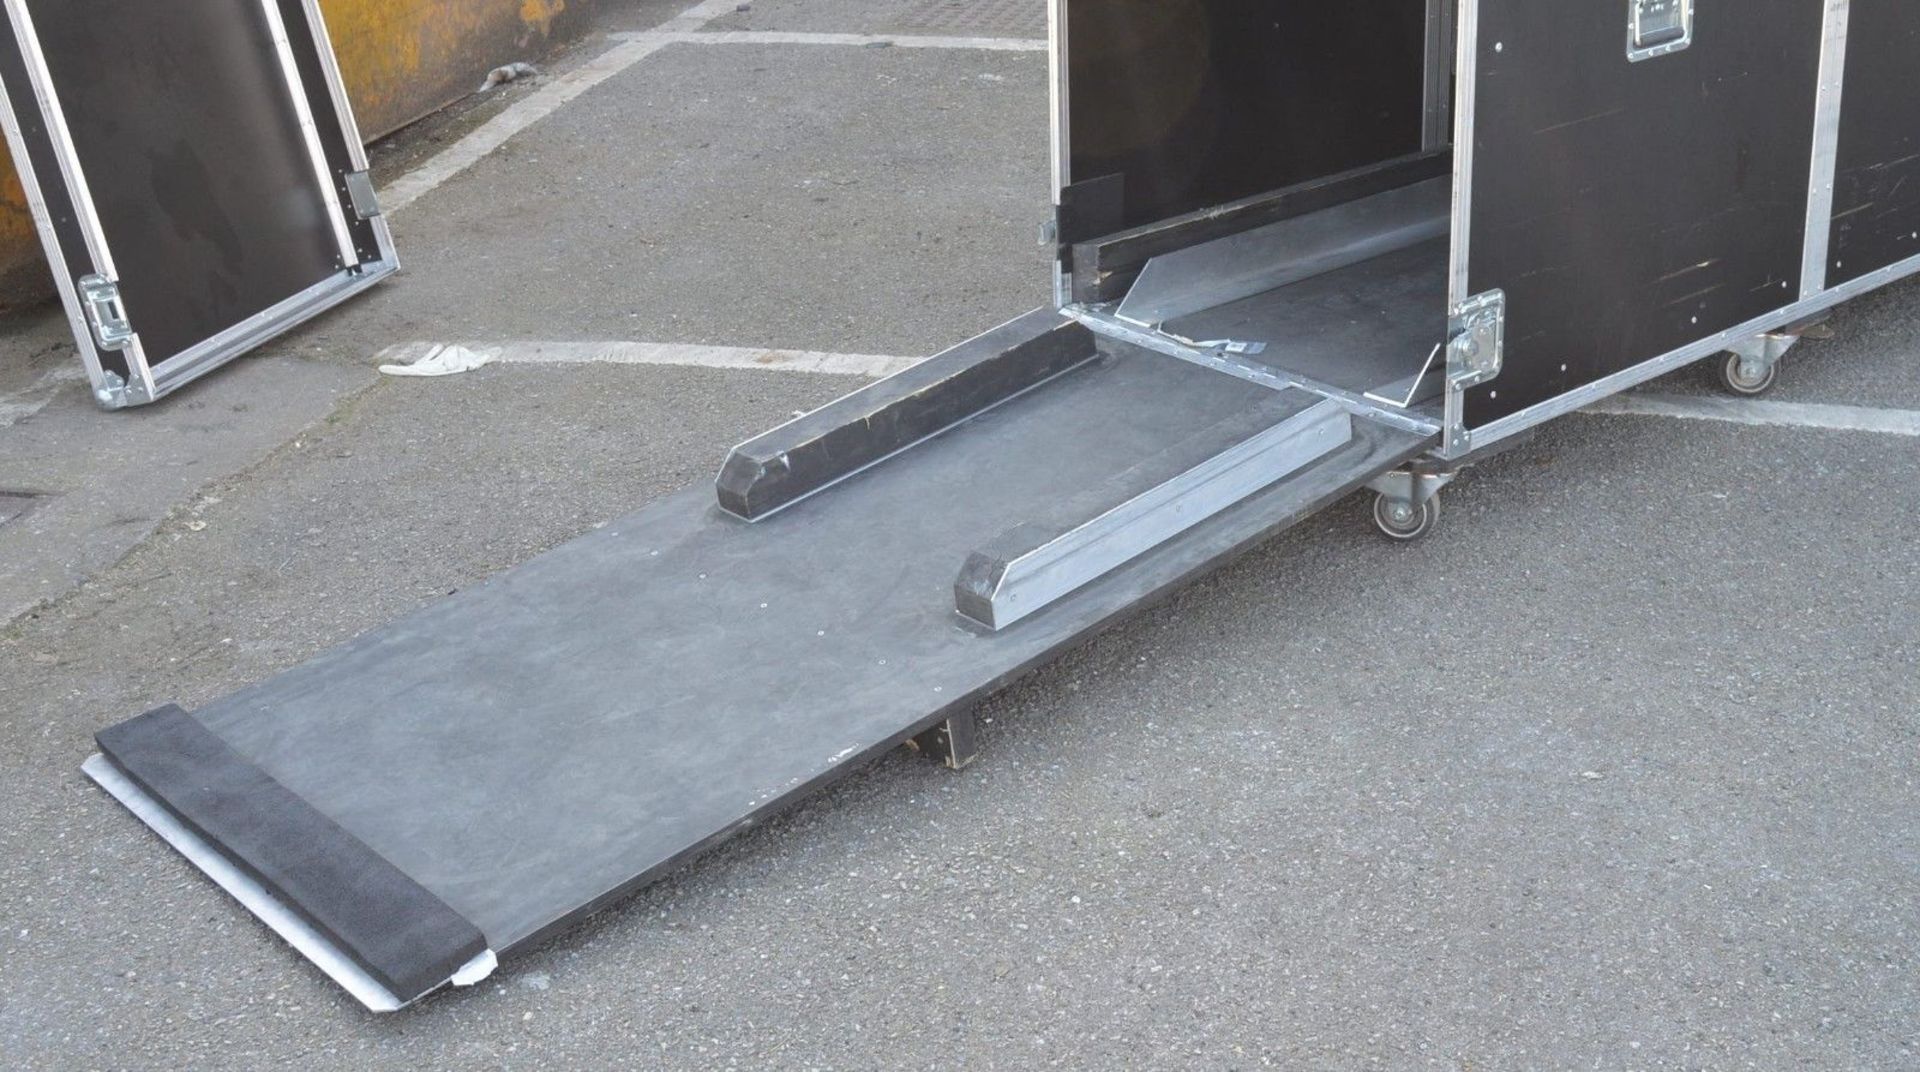 1 x Large Flight Case With Castors and Ramp For Easy Loading - H188 x W200 x D79 cms - CL011 - - Image 4 of 11